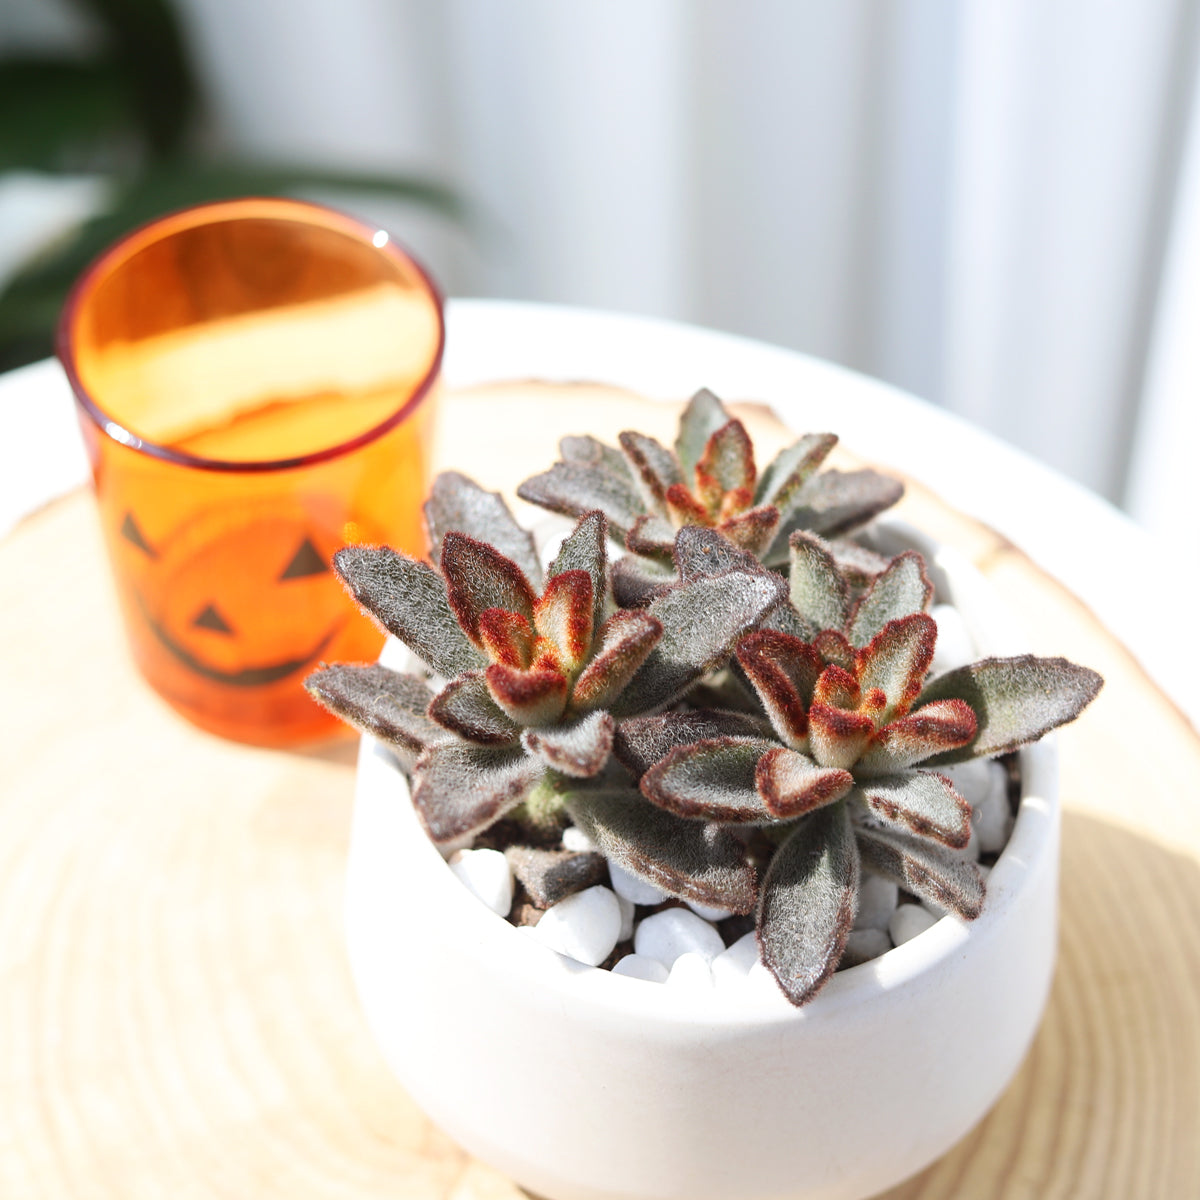 Kalanchoe Chocolate Soldier